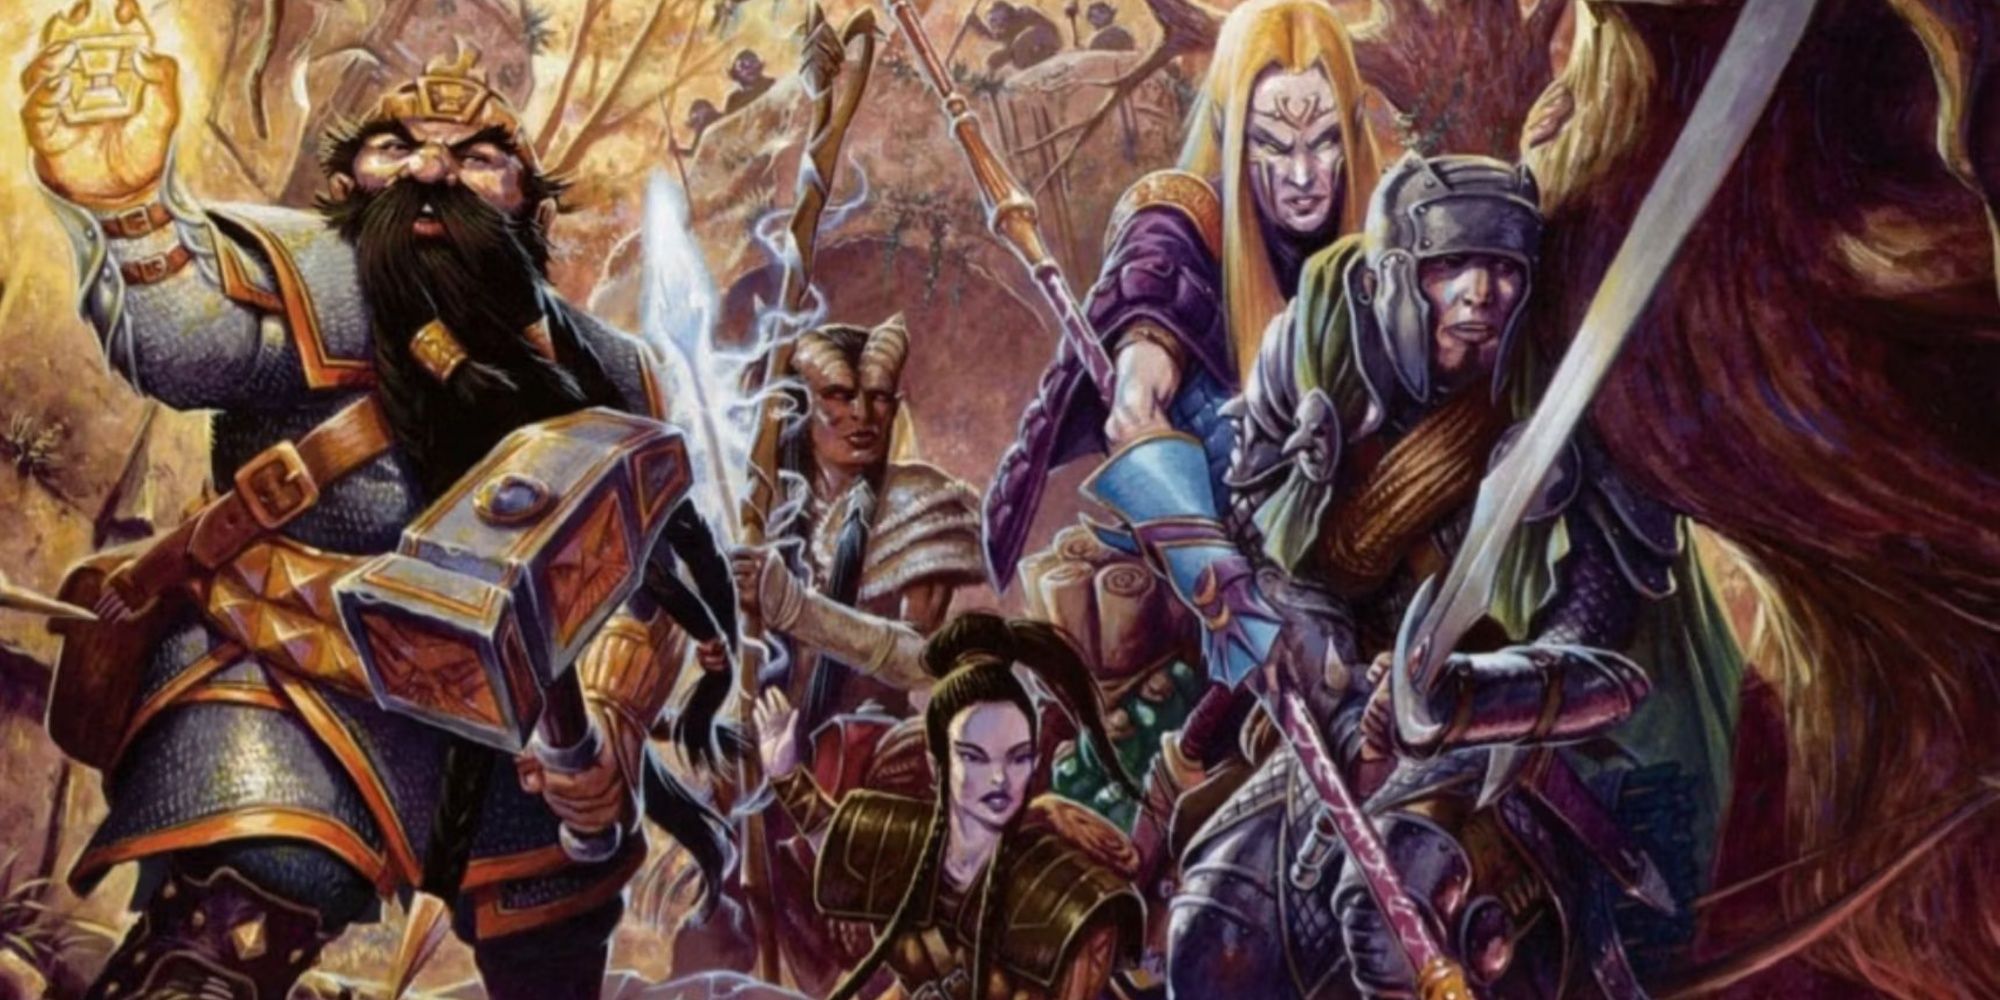 Dungeons & Dragons art of various playable species